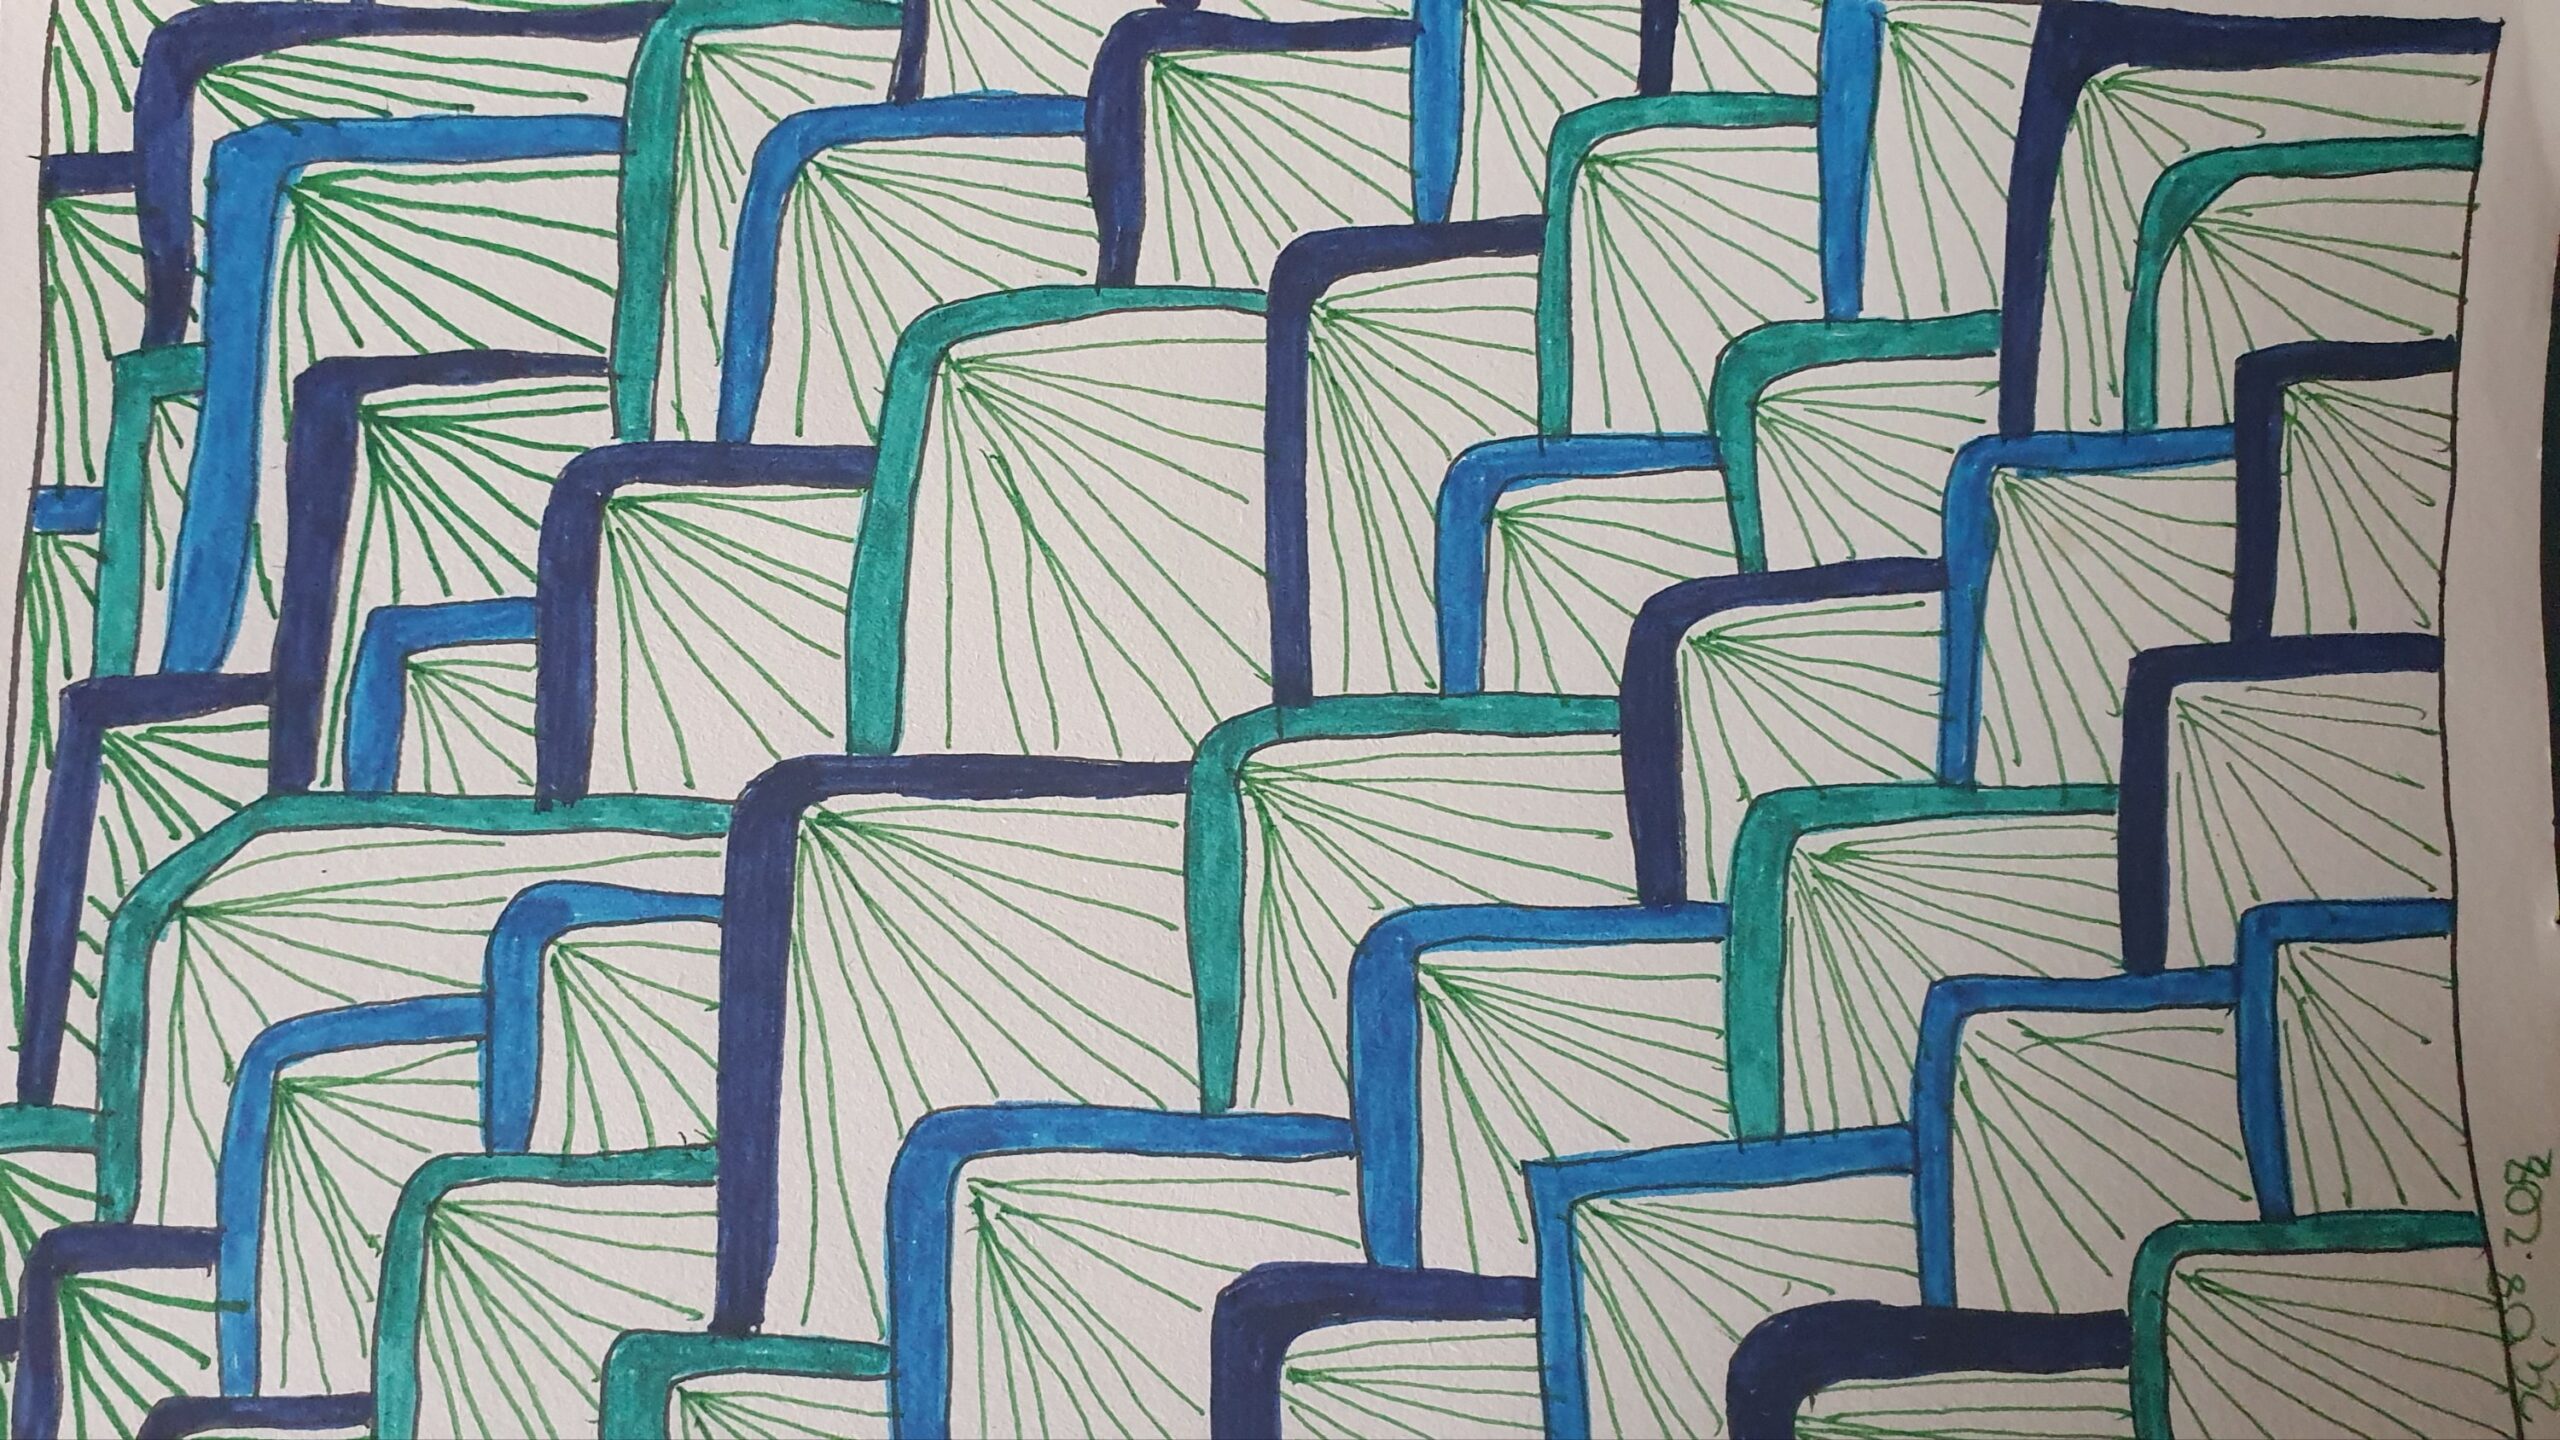 Photo of a zentangle. Half squares (upper left corner) from the lower right to the upper left. The lines coloured in various shades of blue, green, turqouise. The empty spaces are filled with green lines always leading up to the corner of the squares